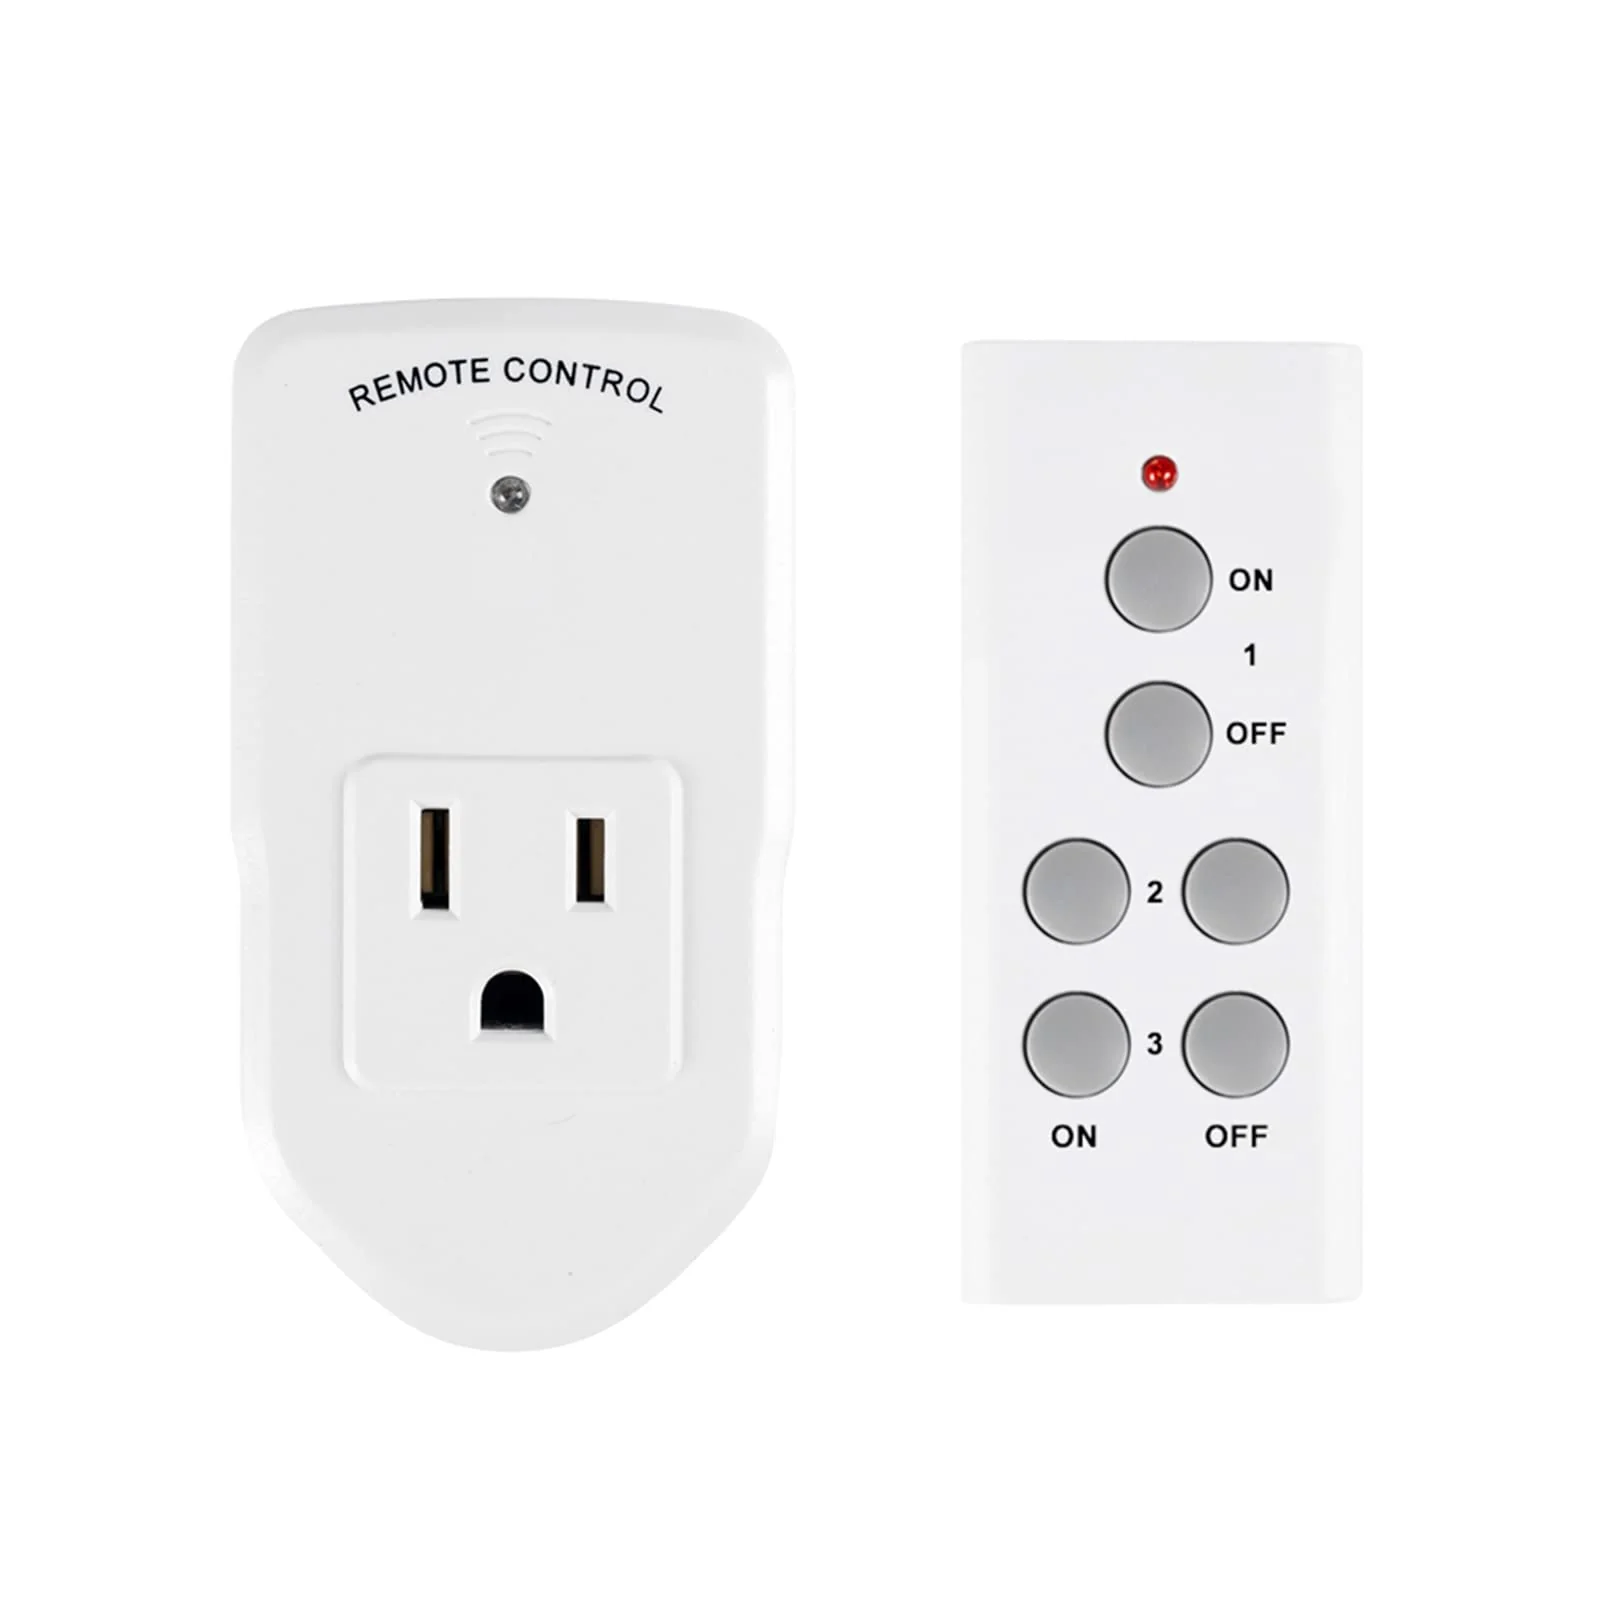 Upgrade Your Home with BN-LINK Wireless Remote Outlets for Hassle-Free Control